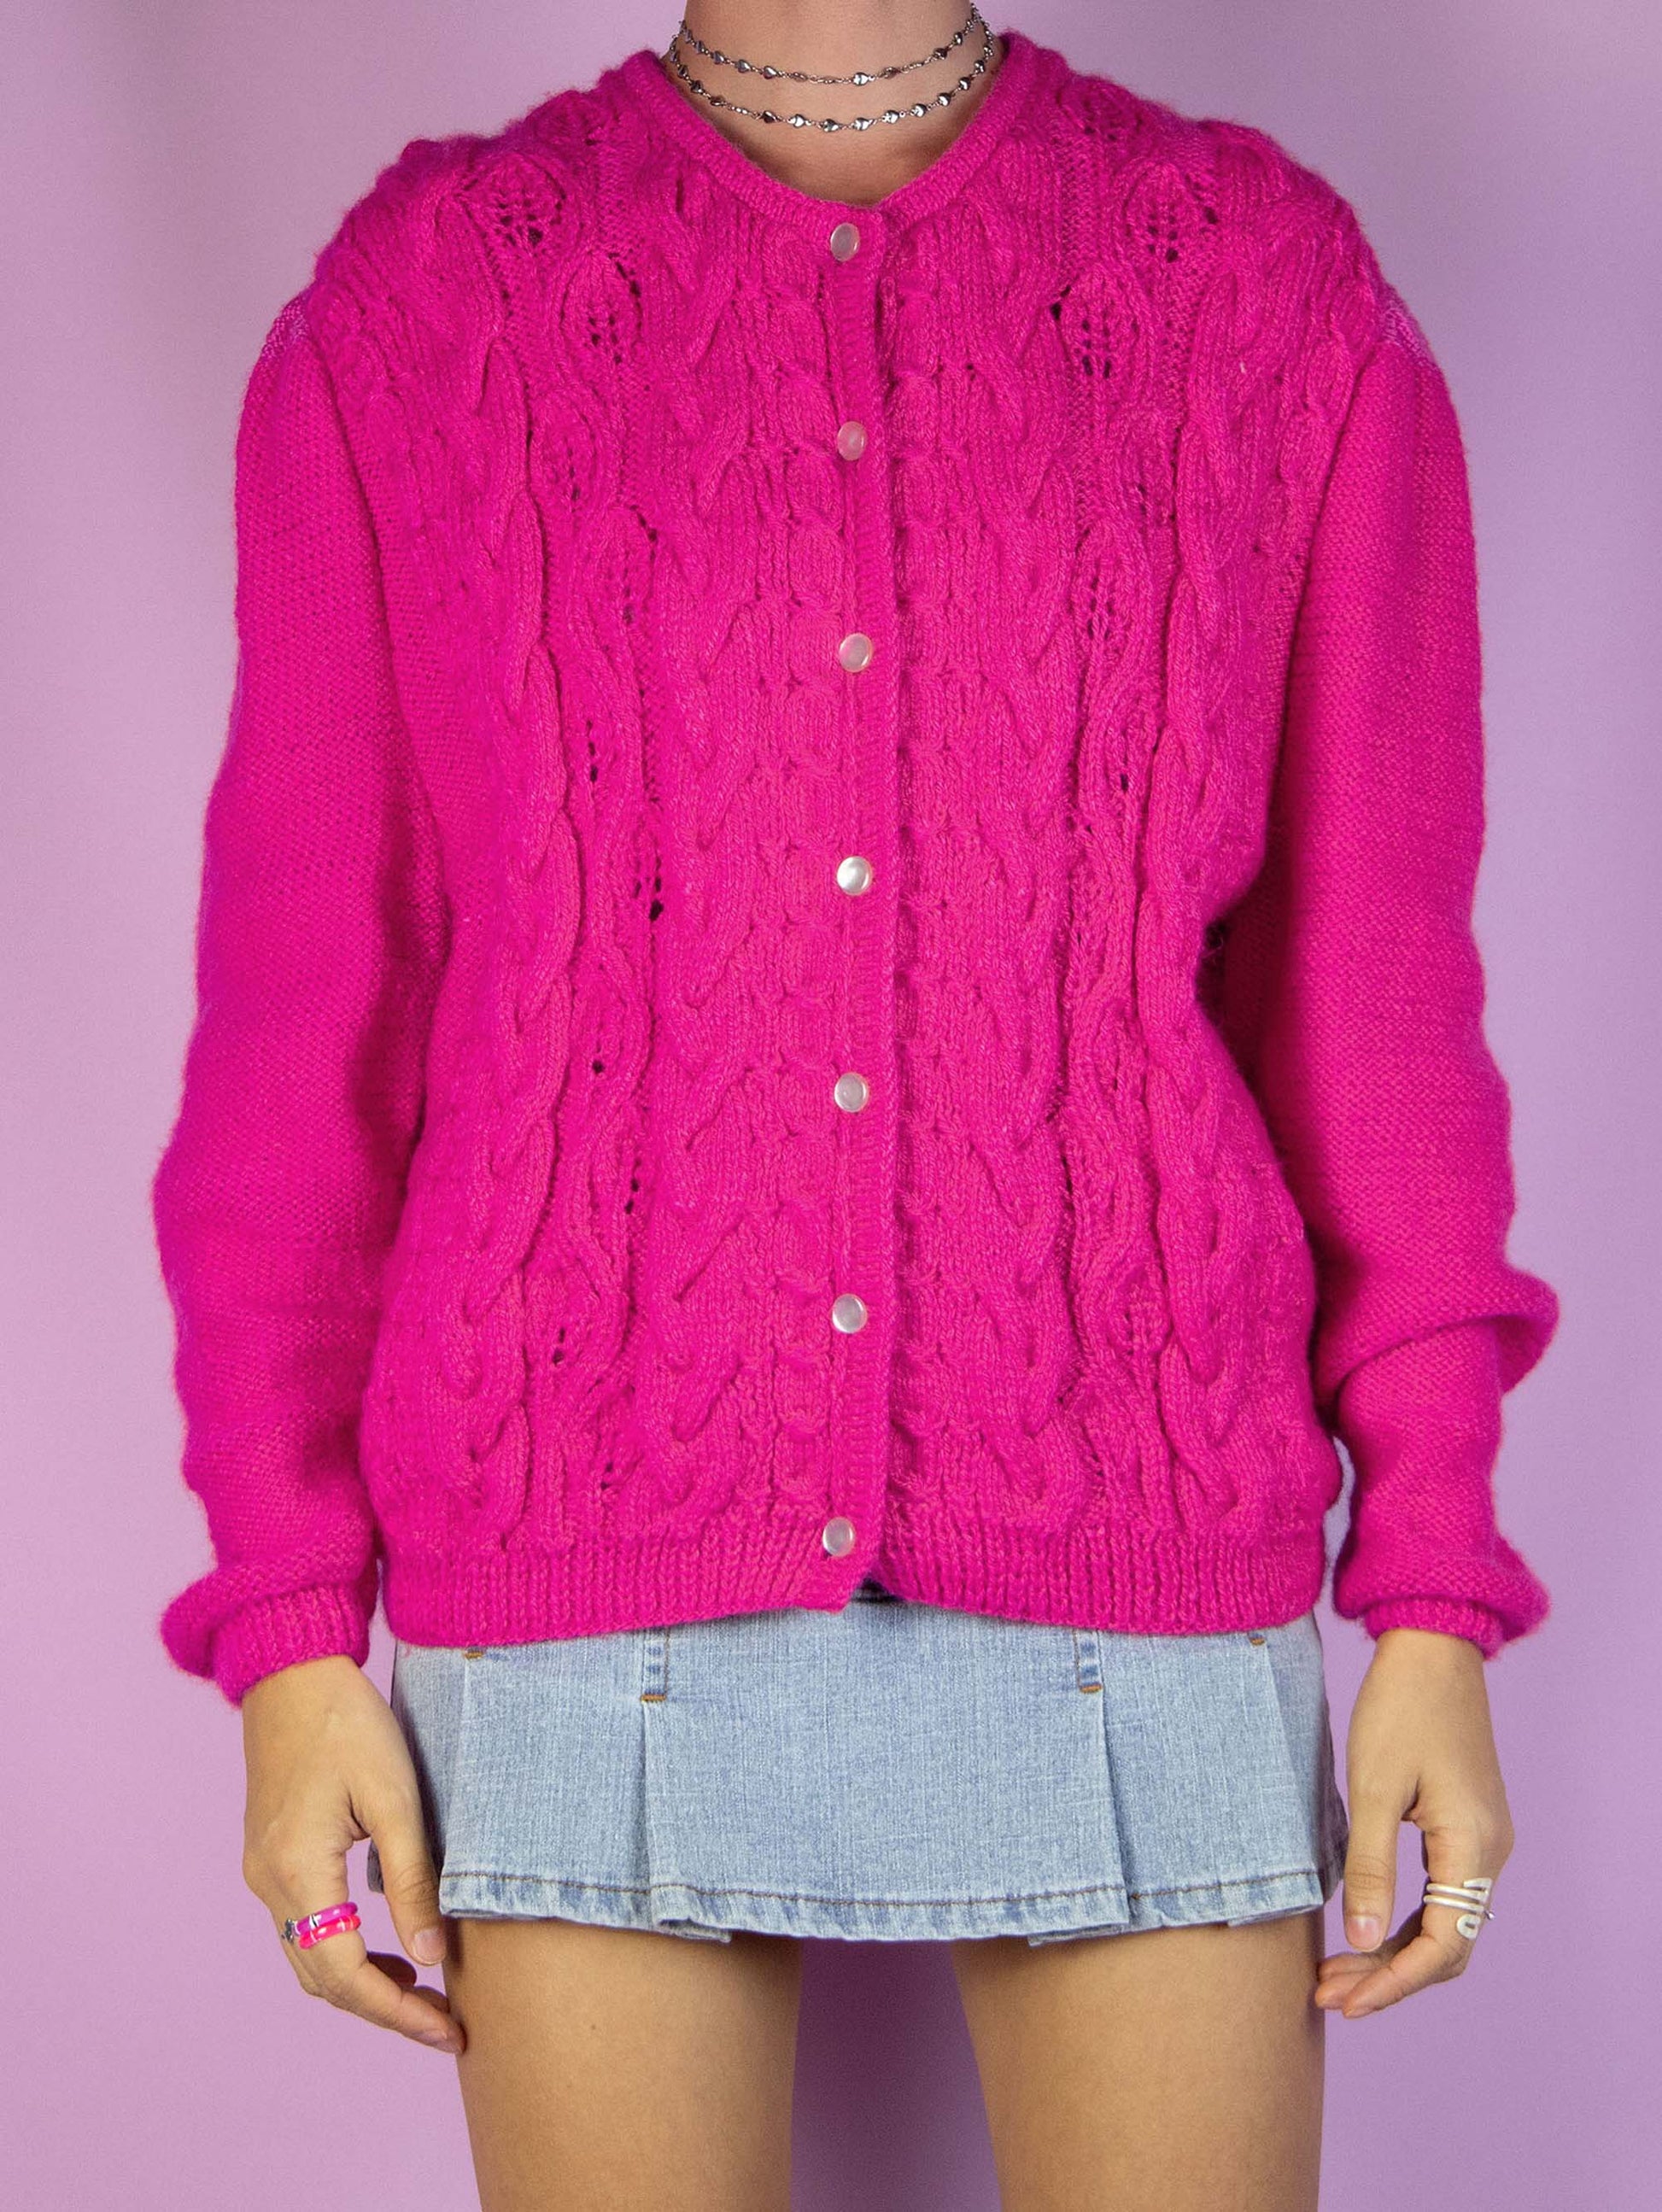 The Vintage 90s Romantic Pink Cardigan is a winter fuchsia hot pink cardigan sweater with cable-knit front, puff sleeve and buttons.